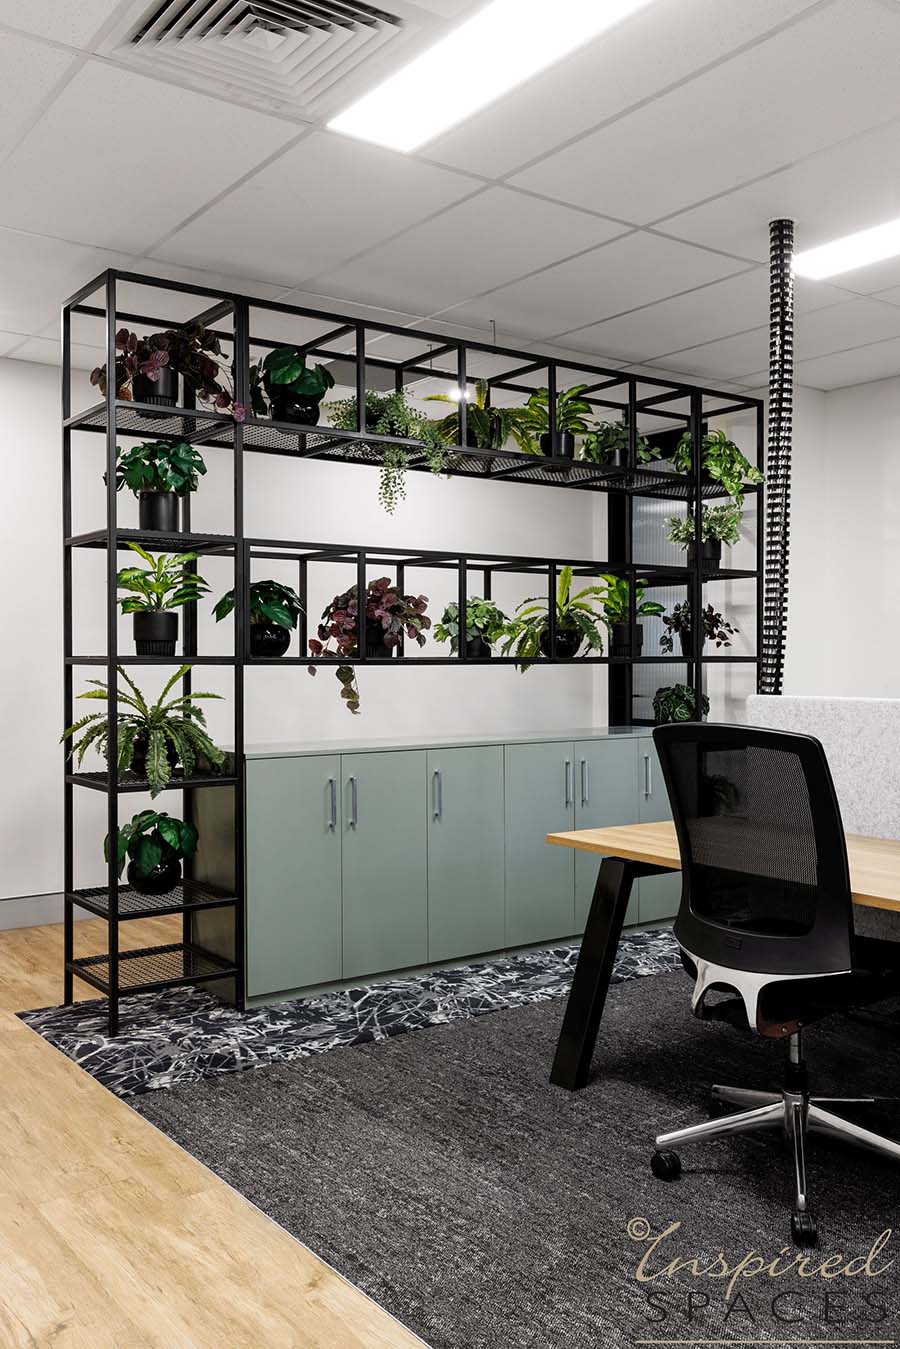 A variety of greenery to create a biophilic office design screen